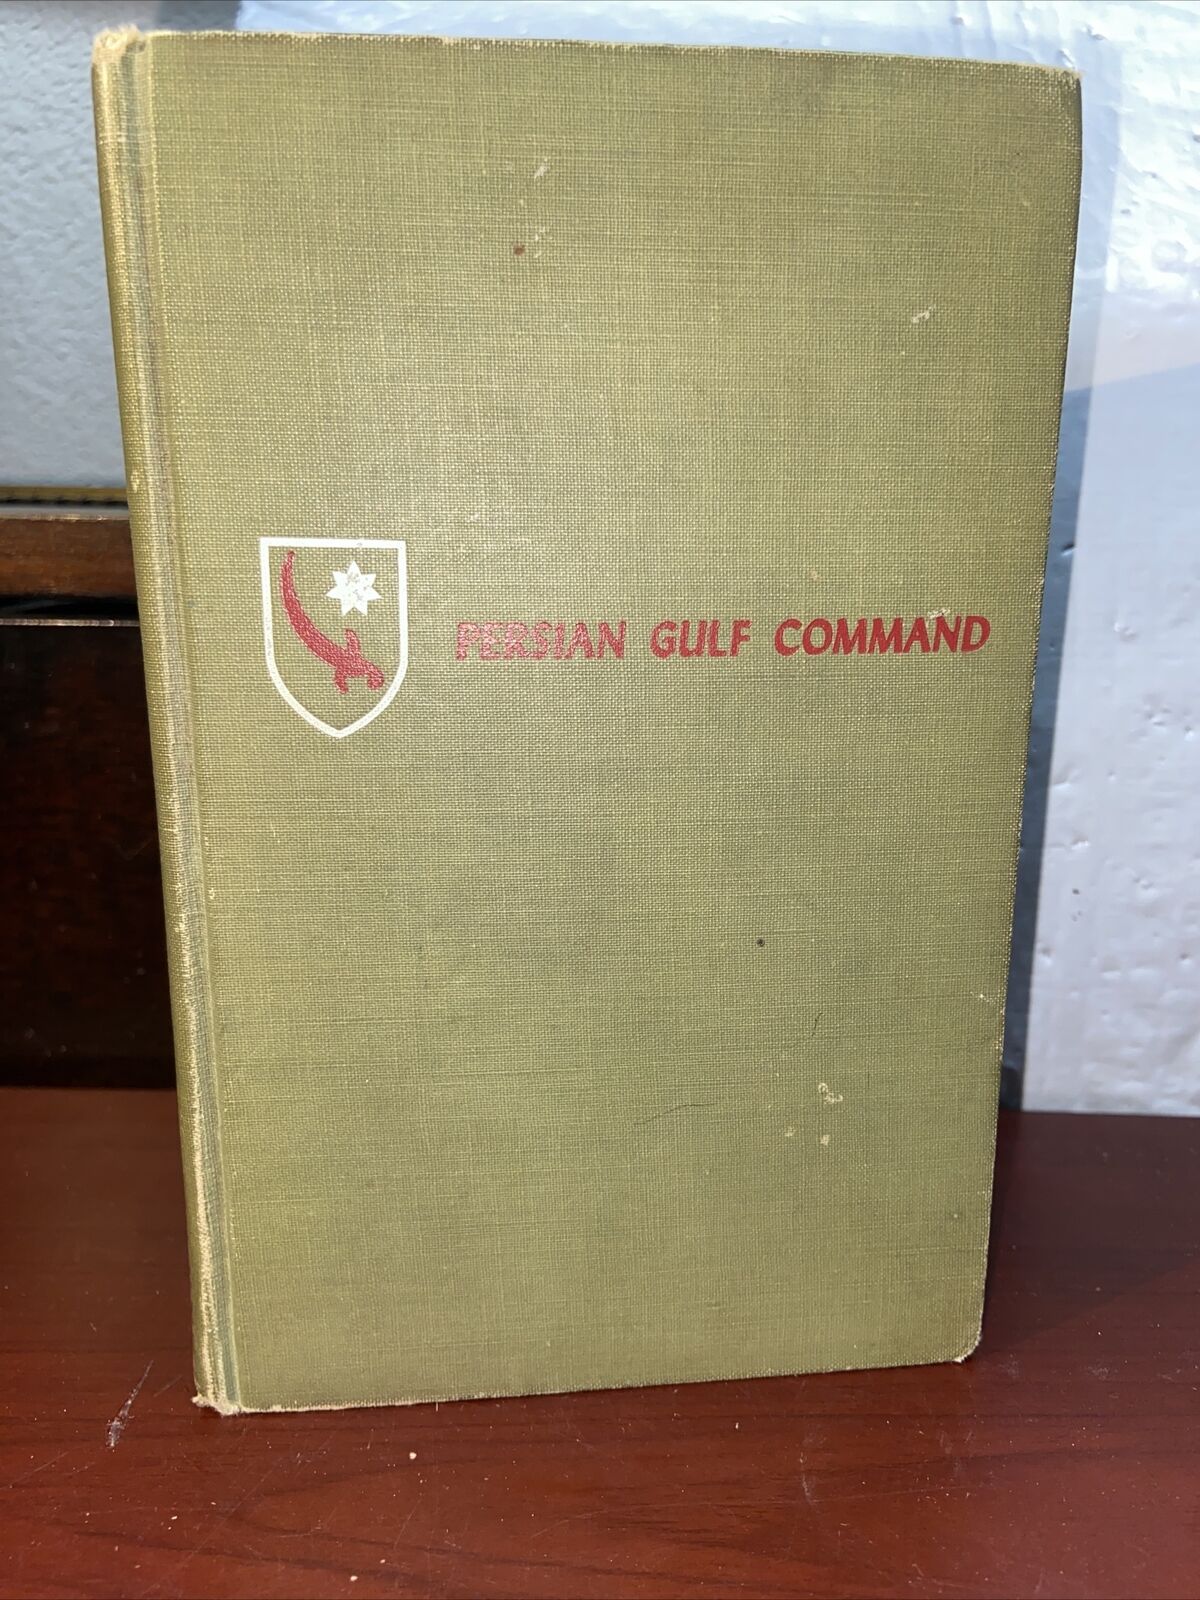 PERSIAN GULF COMMAND, by Joel Sayre,1945,1st Printing, WWII